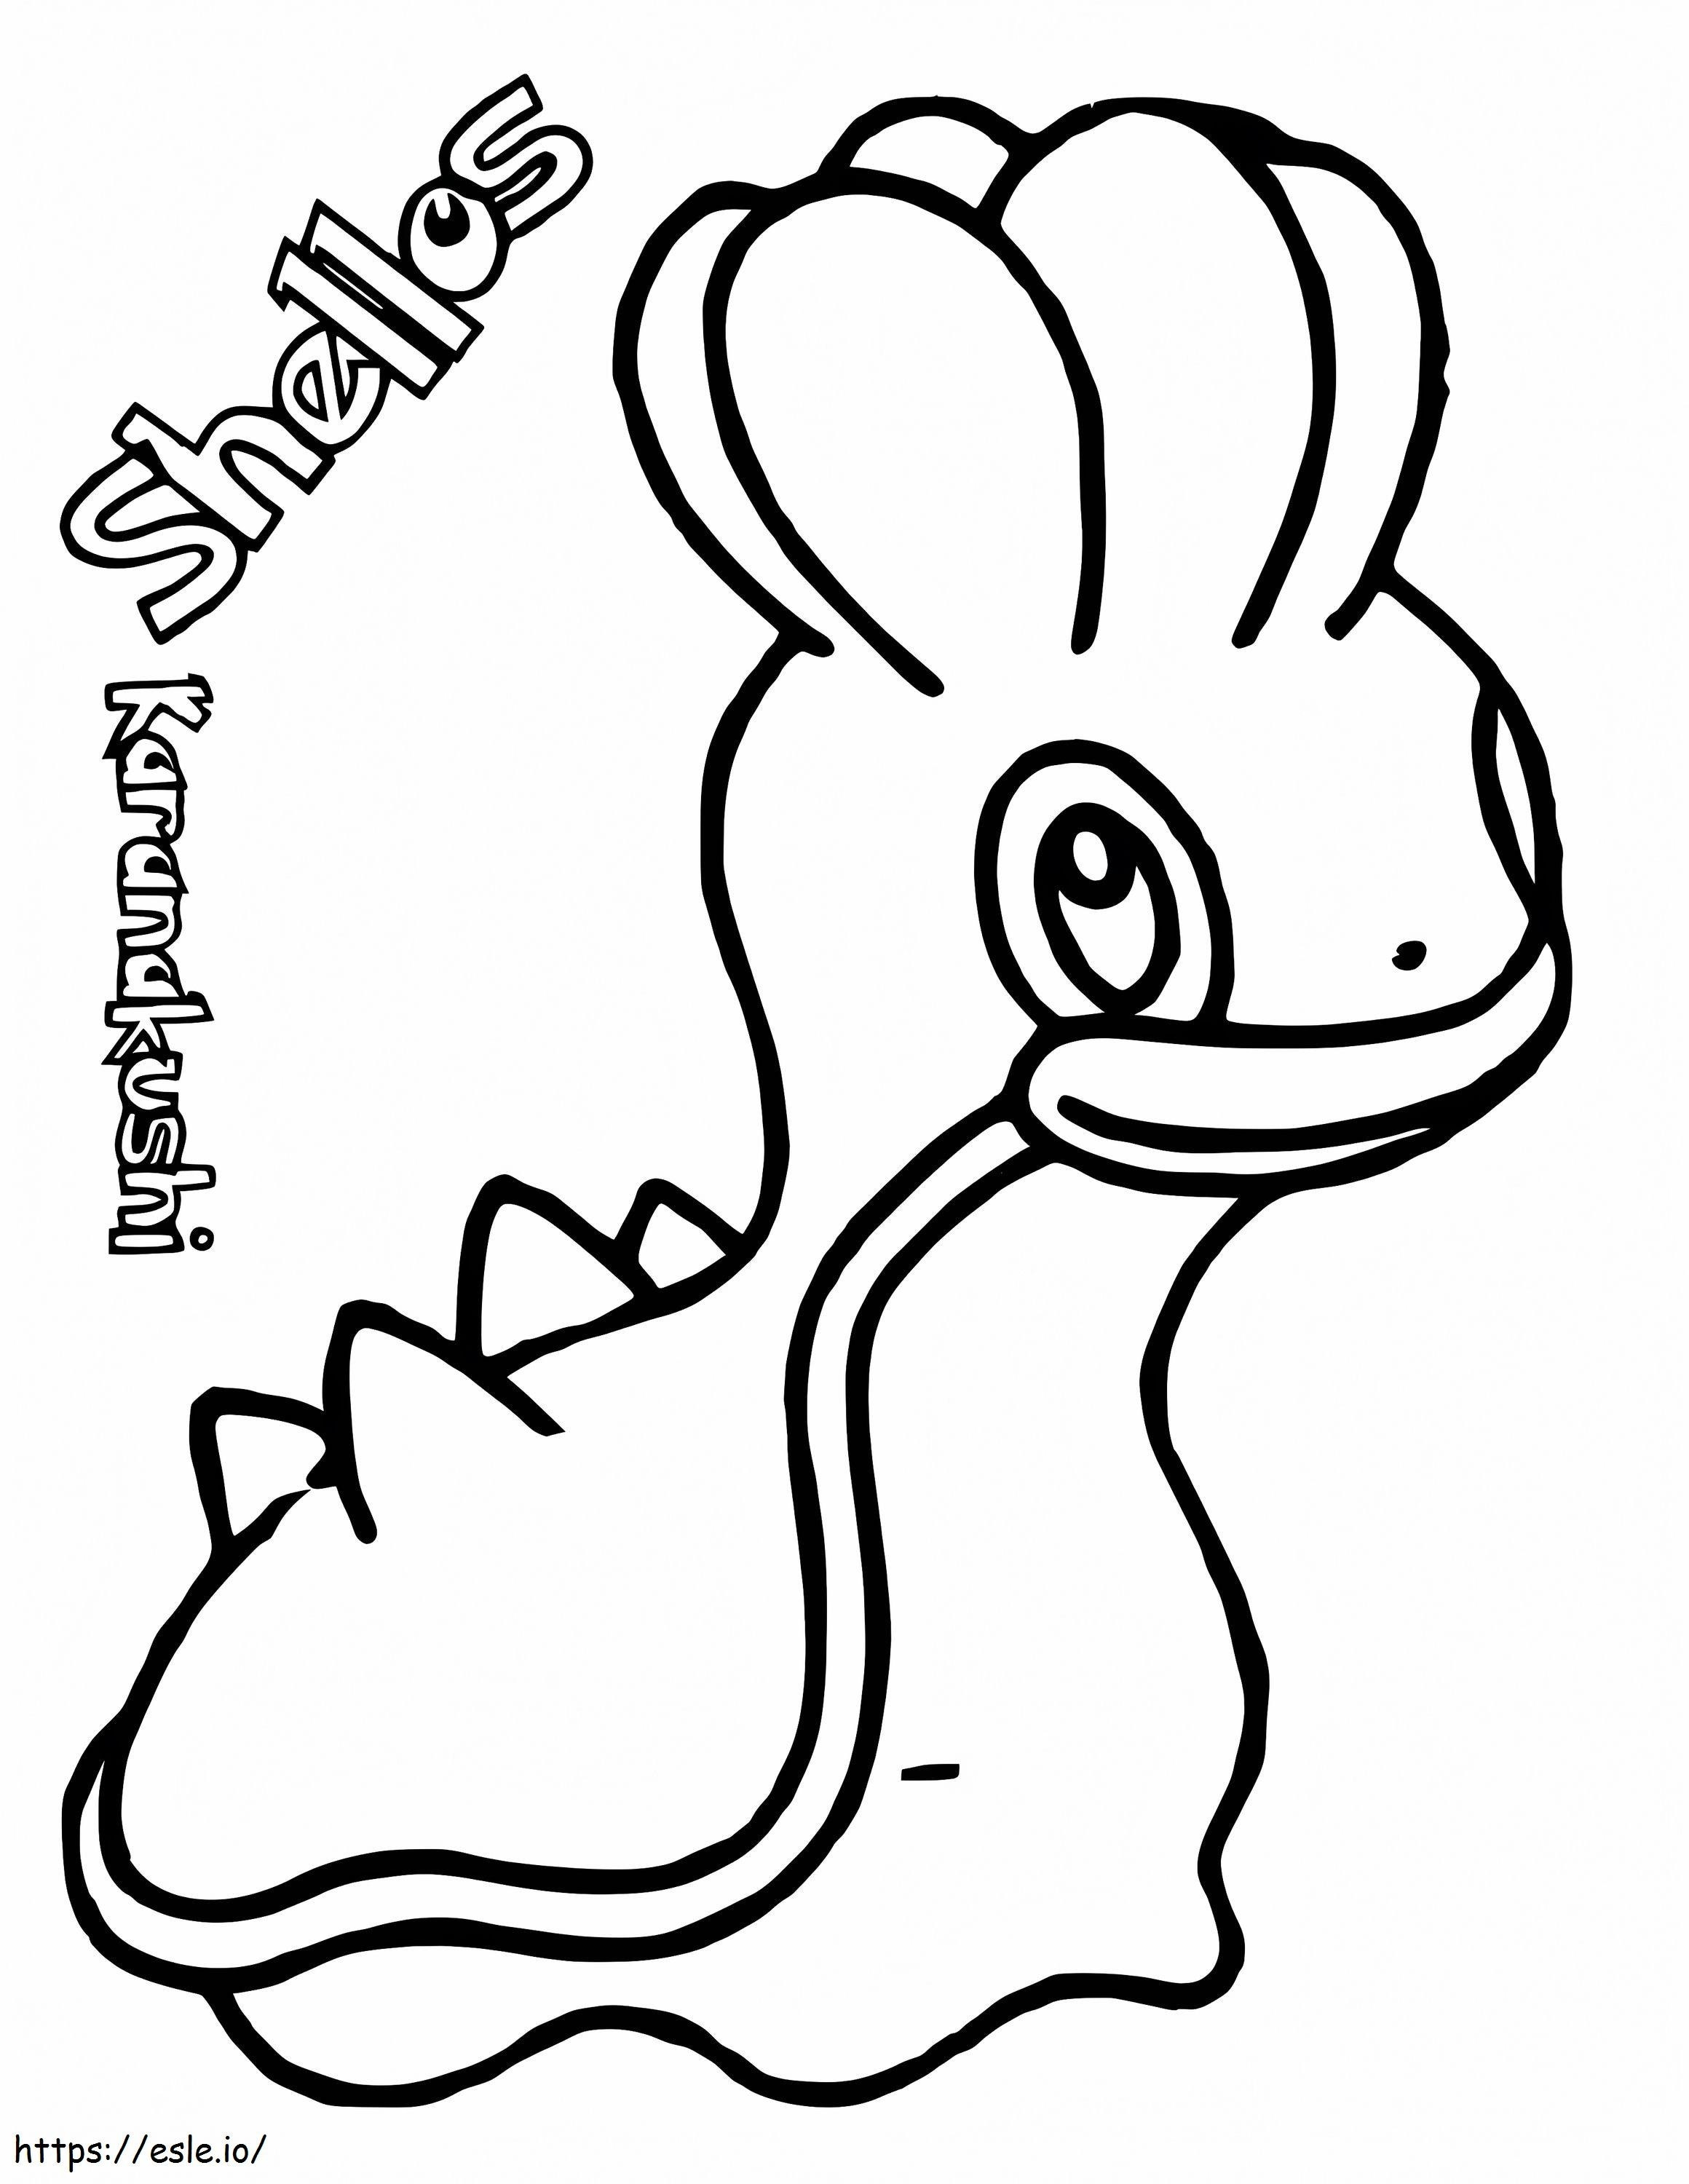 Shellos West Pokemon coloring page